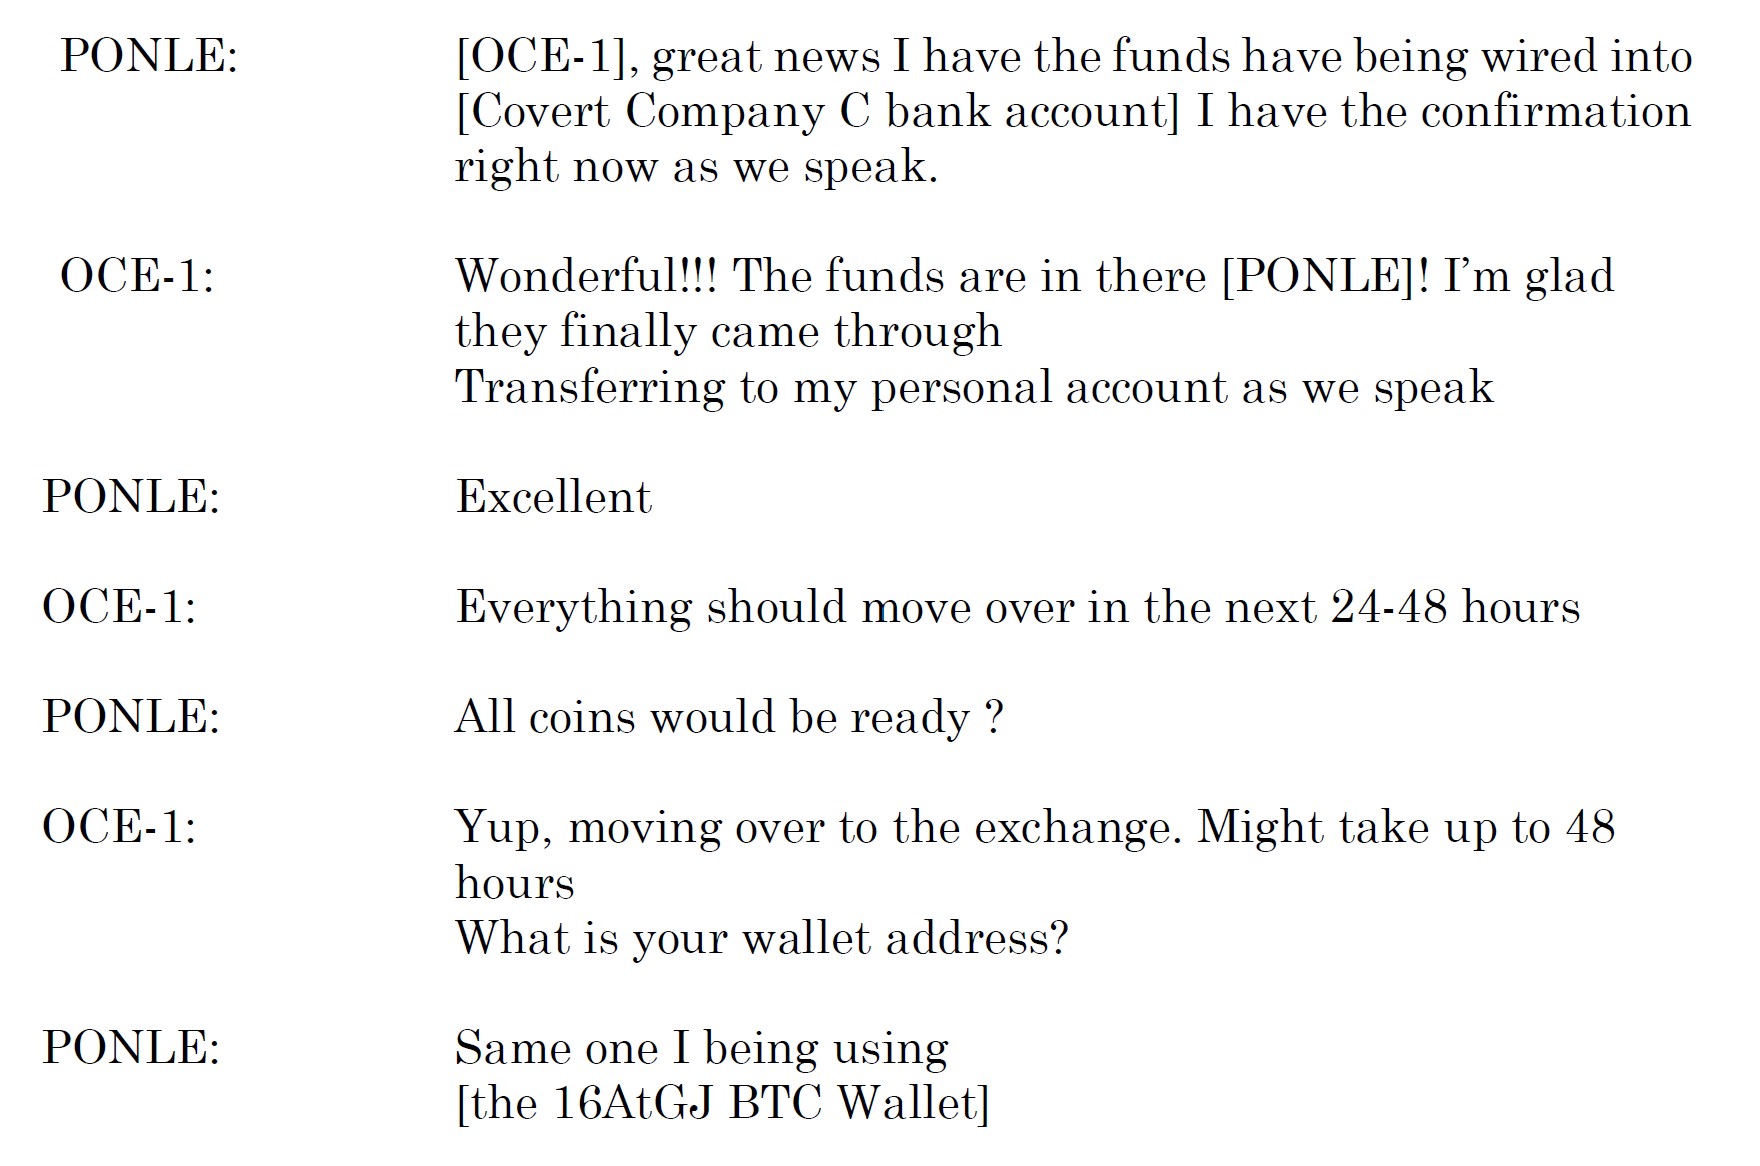 A discussion between Ponle and his associate of the Sept. 9, 2019 transaction